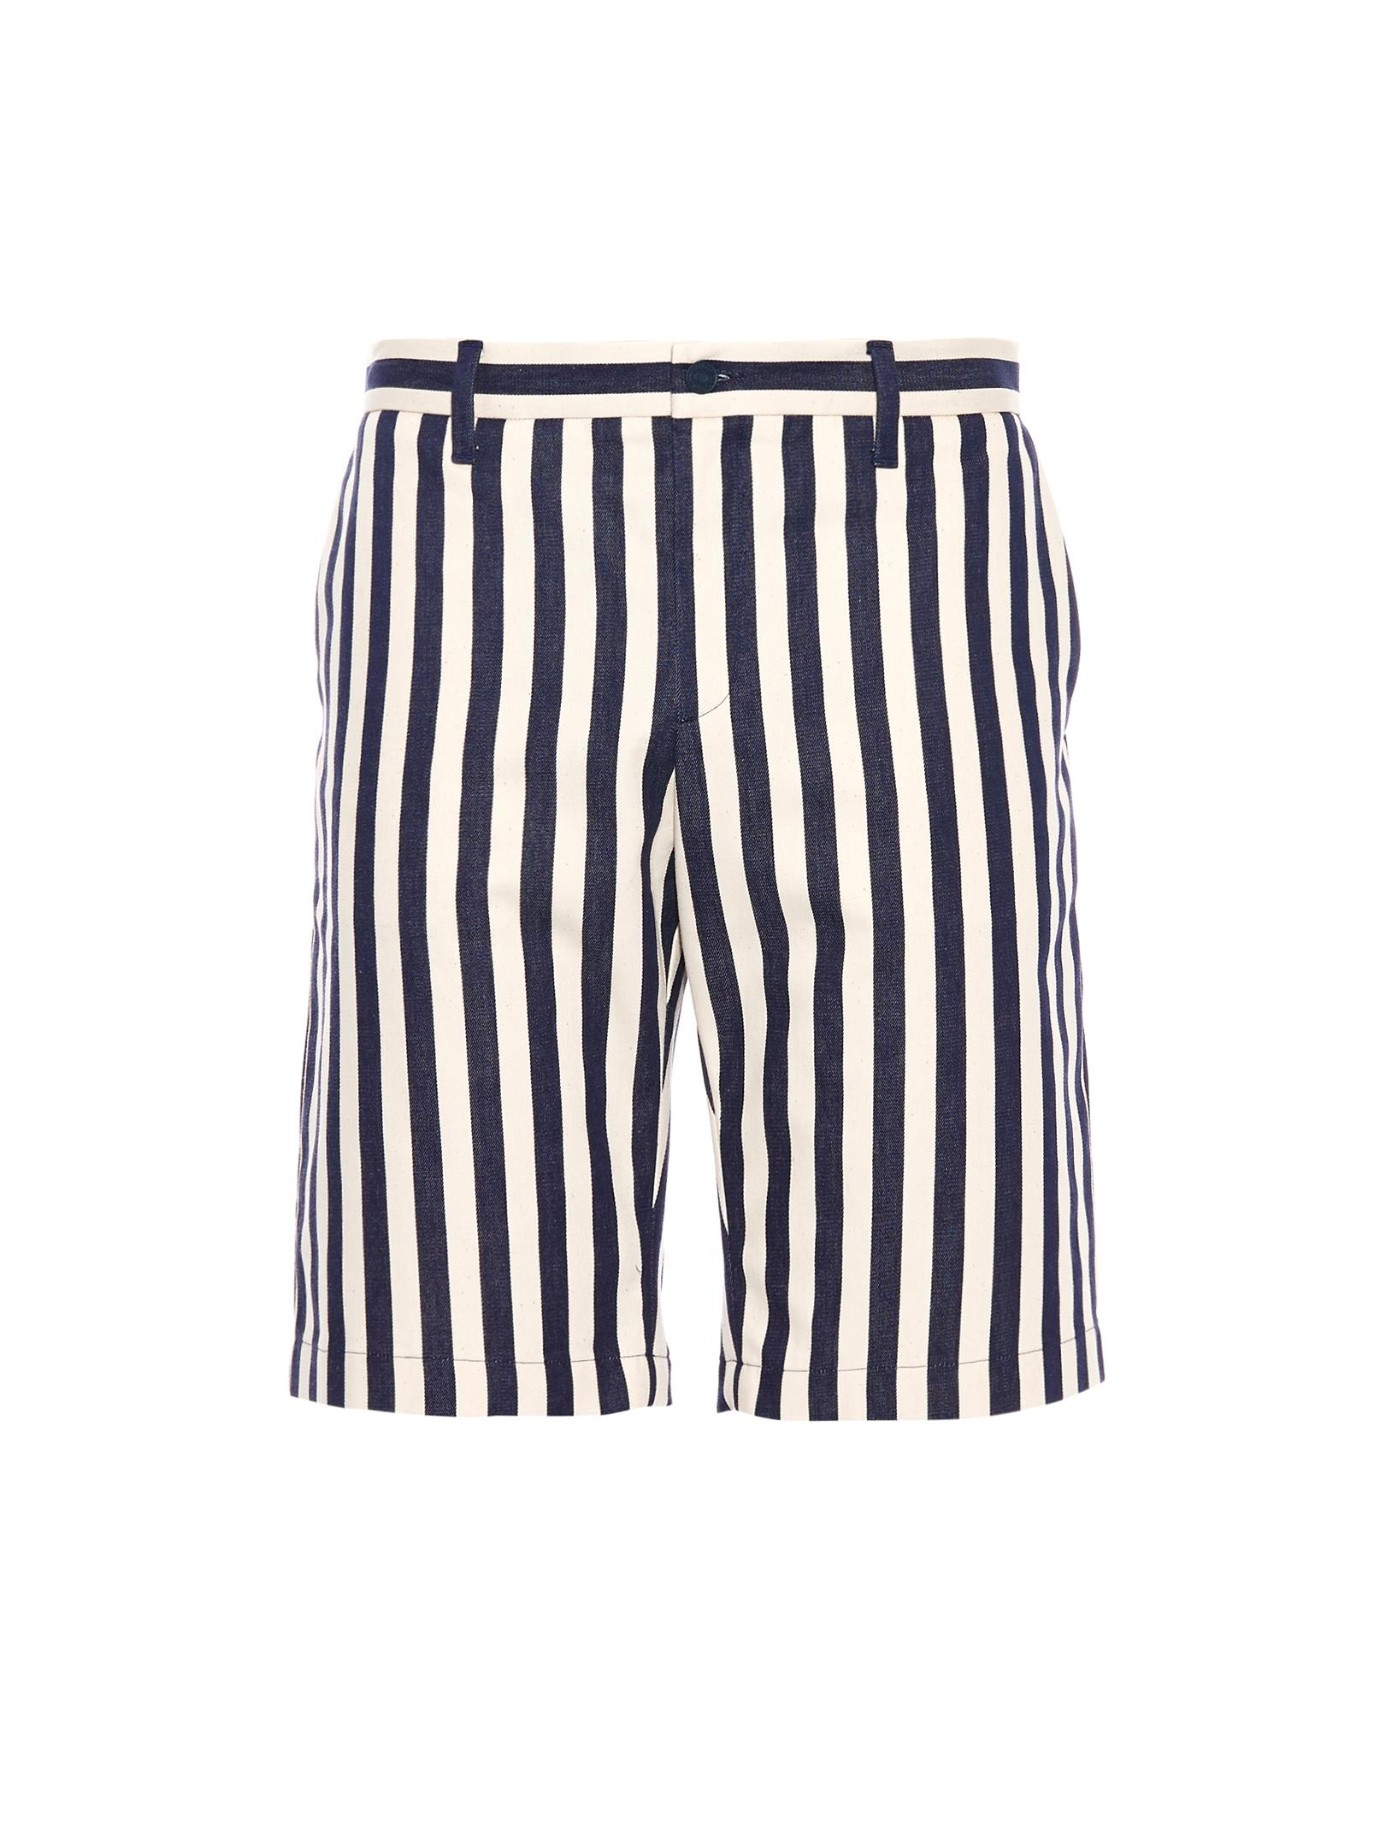 Gucci Striped Cotton Shorts in Blue for Men (NAVY WHITE) | Lyst